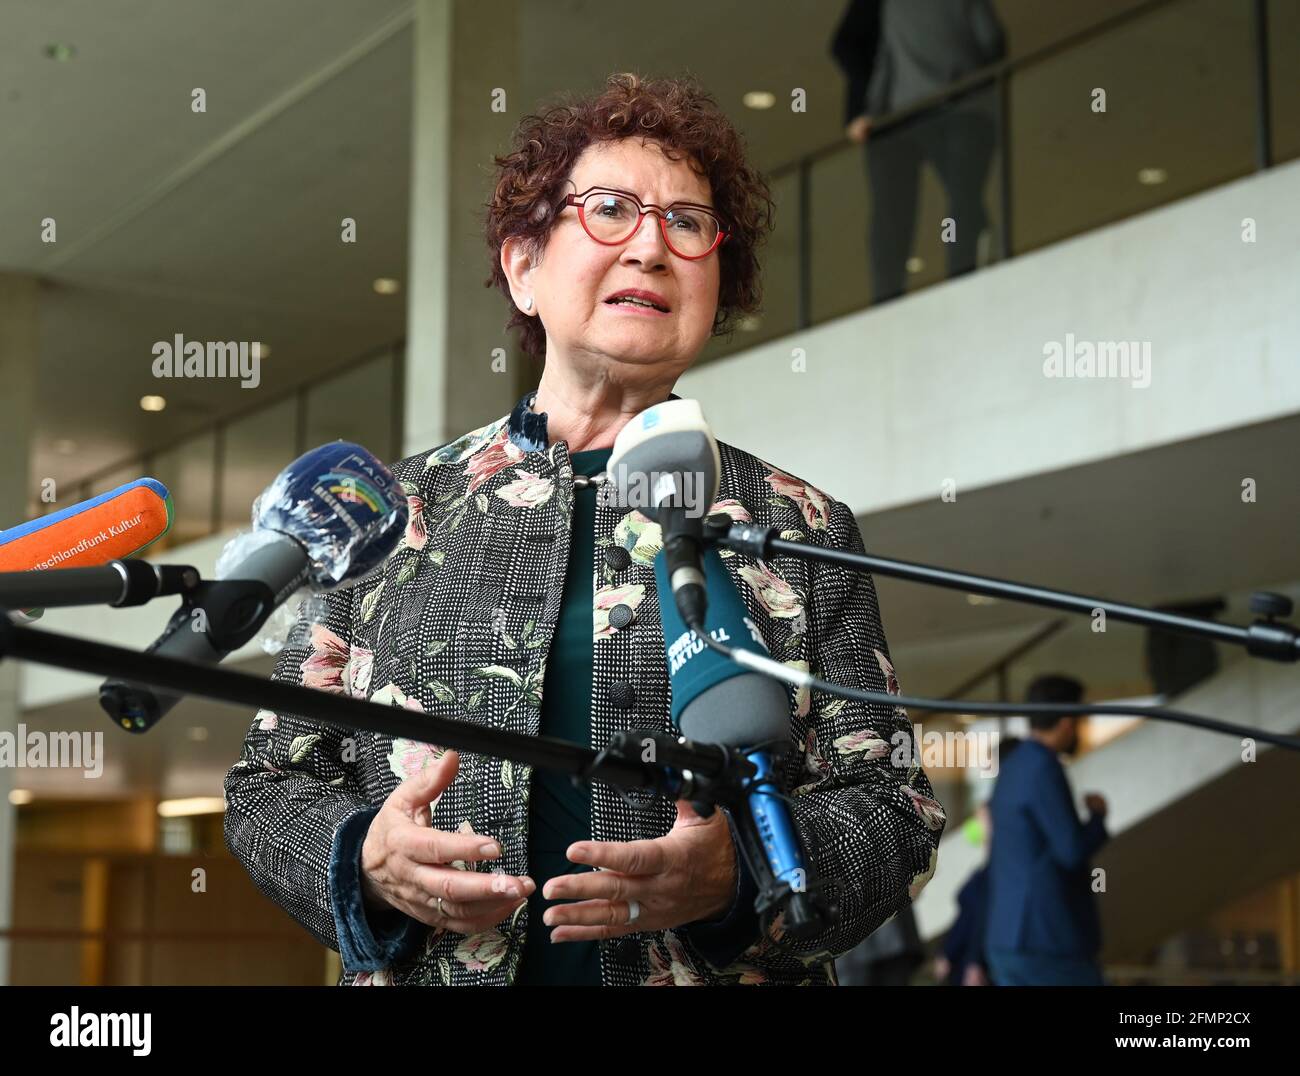 Stuttgart, Germany. 11th May, 2021. Gerlinde Kretschmann, wife of Baden-Württemberg's Prime Minister Kretschmann, talks to journalists before the constituent session of the state parliament. Credit: Bernd Weißbrod/dpa/Alamy Live News Stock Photo